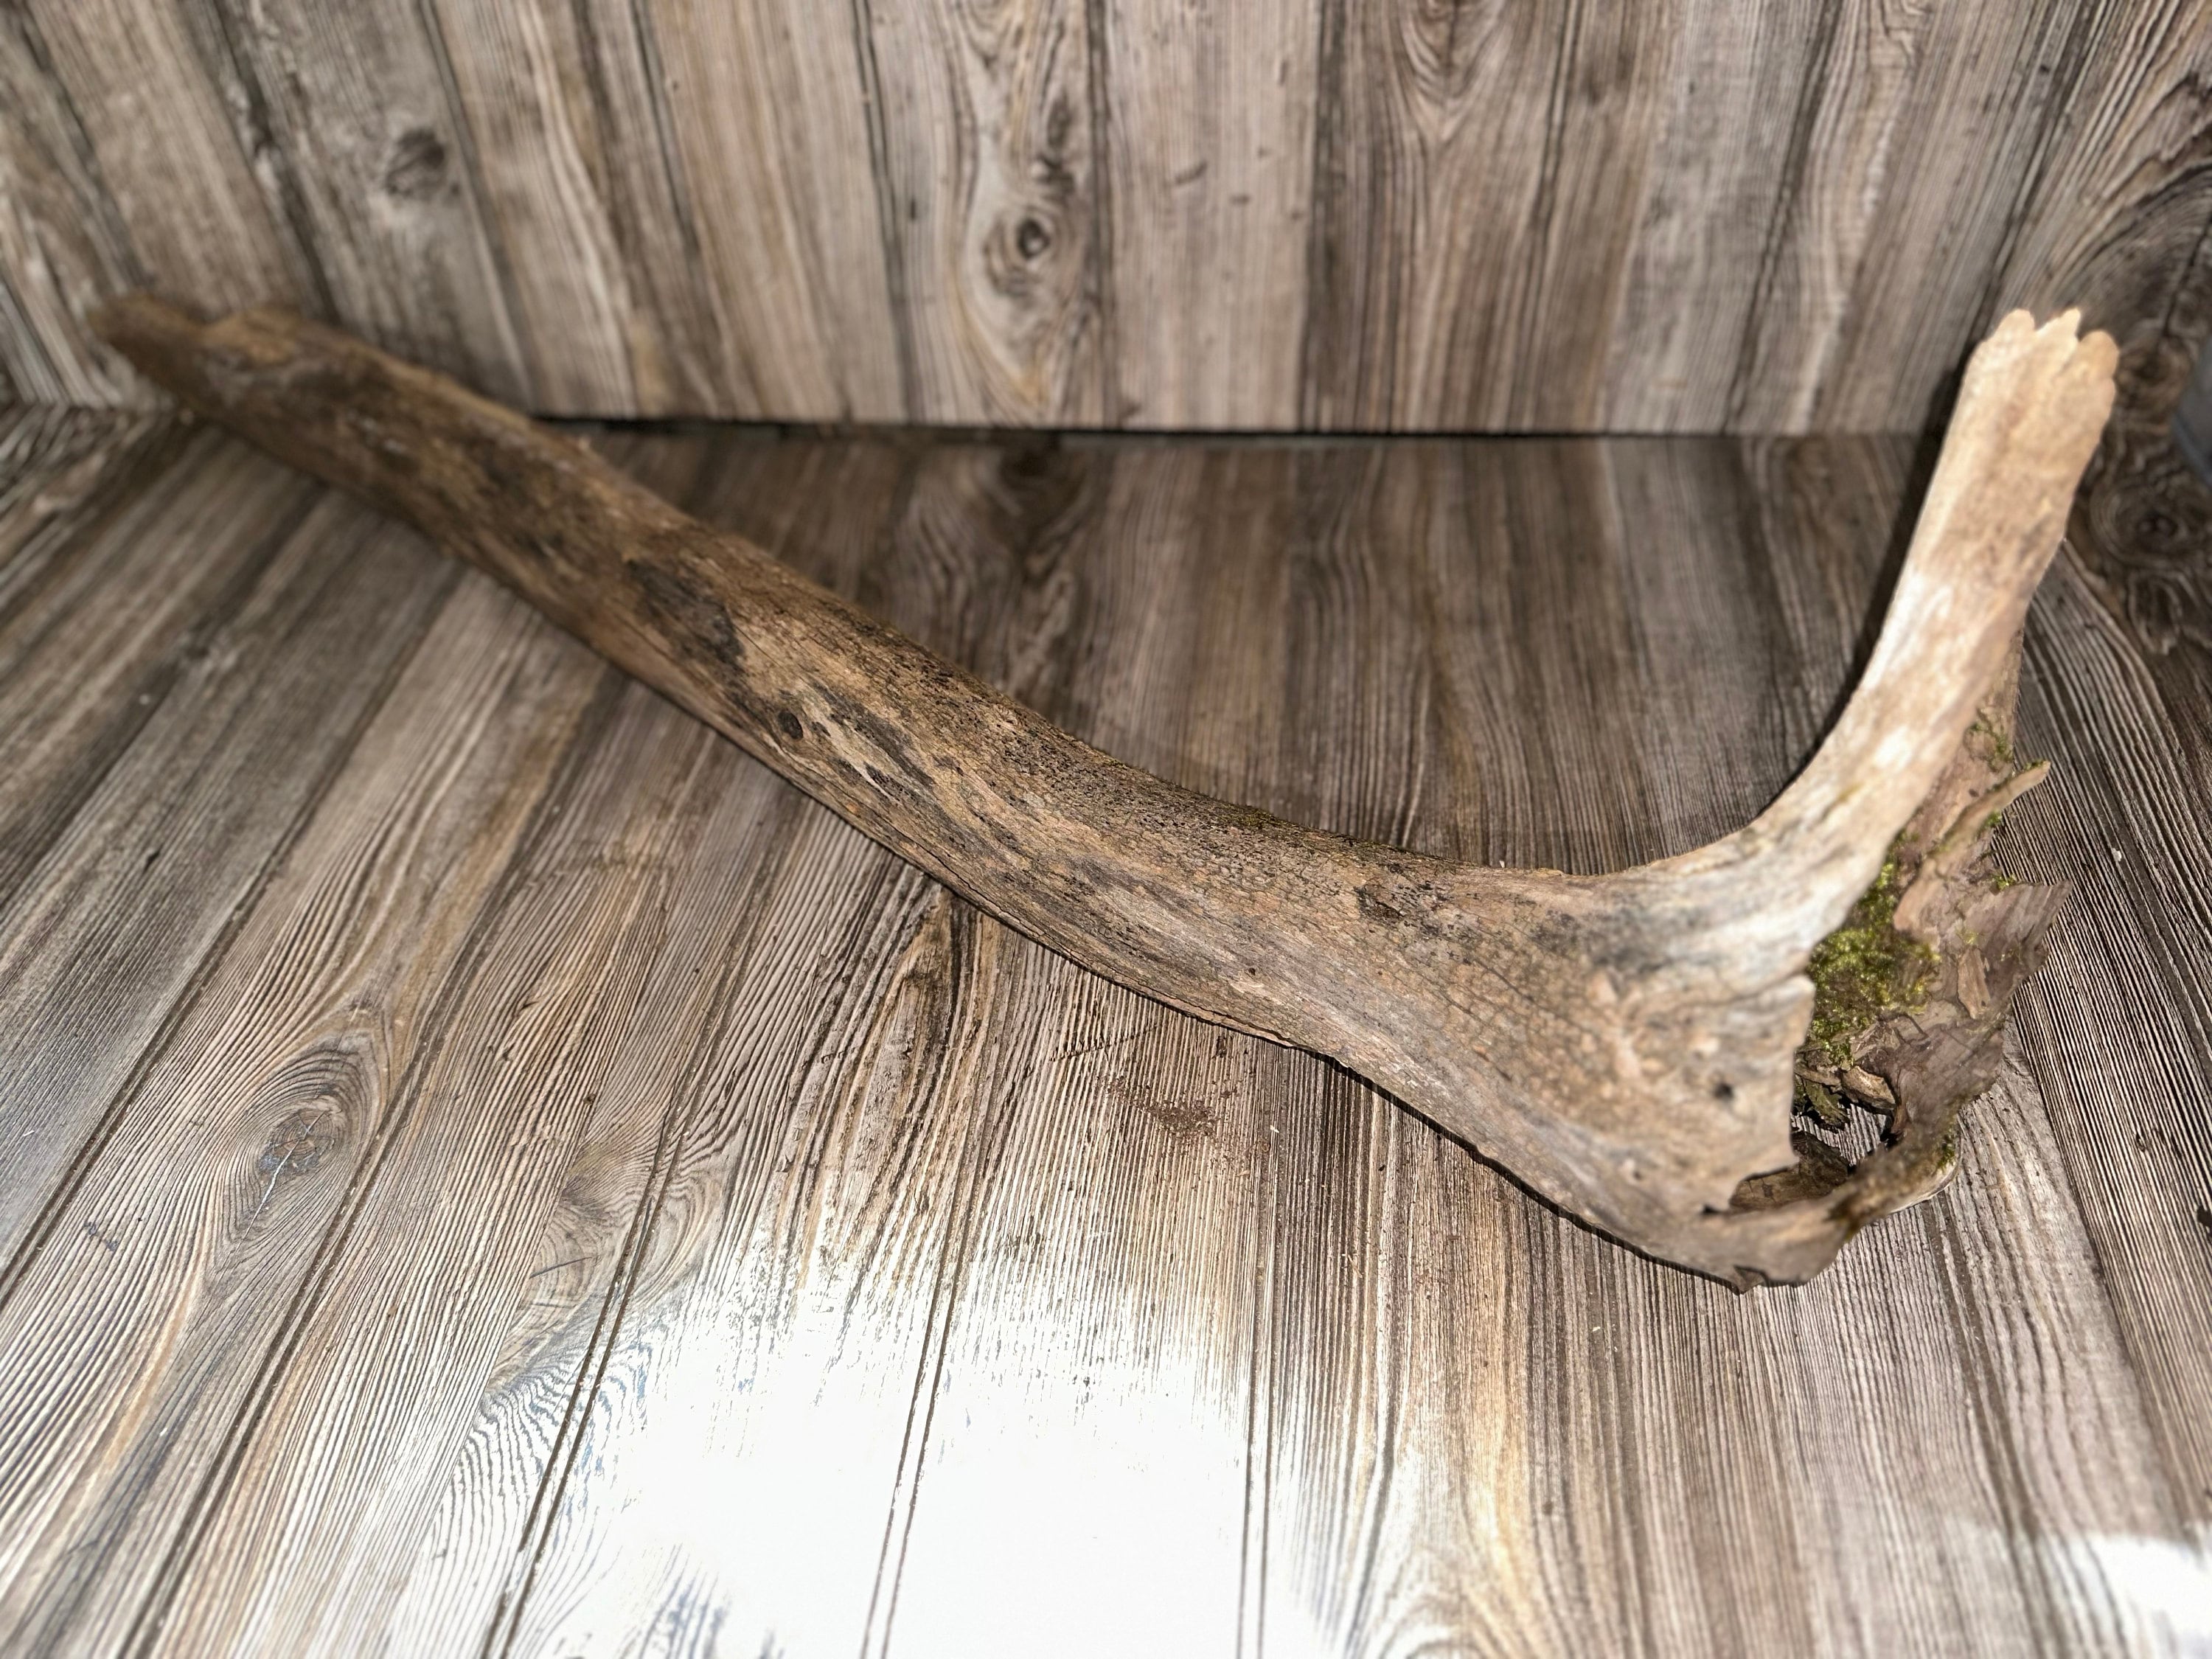 River Driftwood, Hollow Log, Tree Limb, Branch End, Approximately 35 Inches Long by 10 Inches Wide and 5.5 Inches Tall